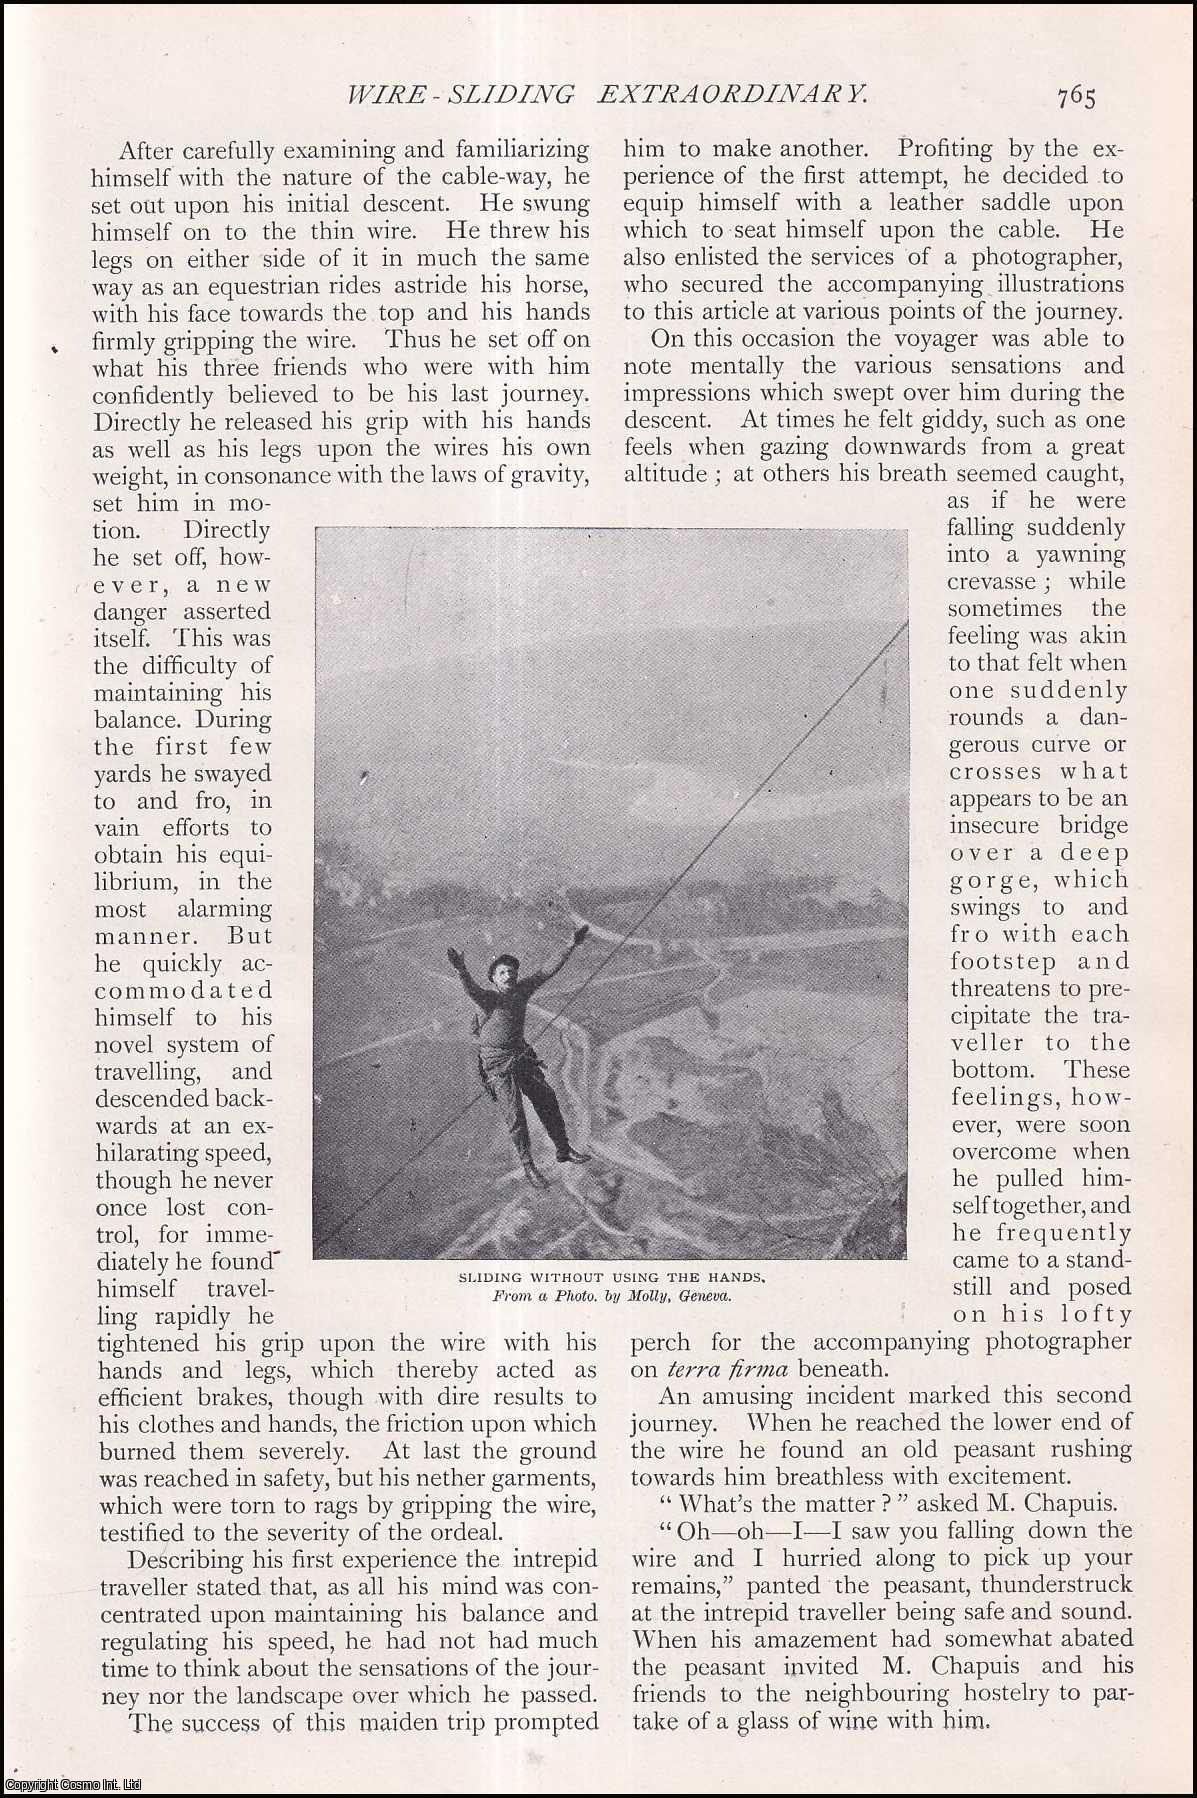 No Author Stated - Wire-Sliding Extraordinary. M. Chapuis sliding down half a mile of wire. Saleve, Geneva. An uncommon original article from The Strand Magazine, 1904.